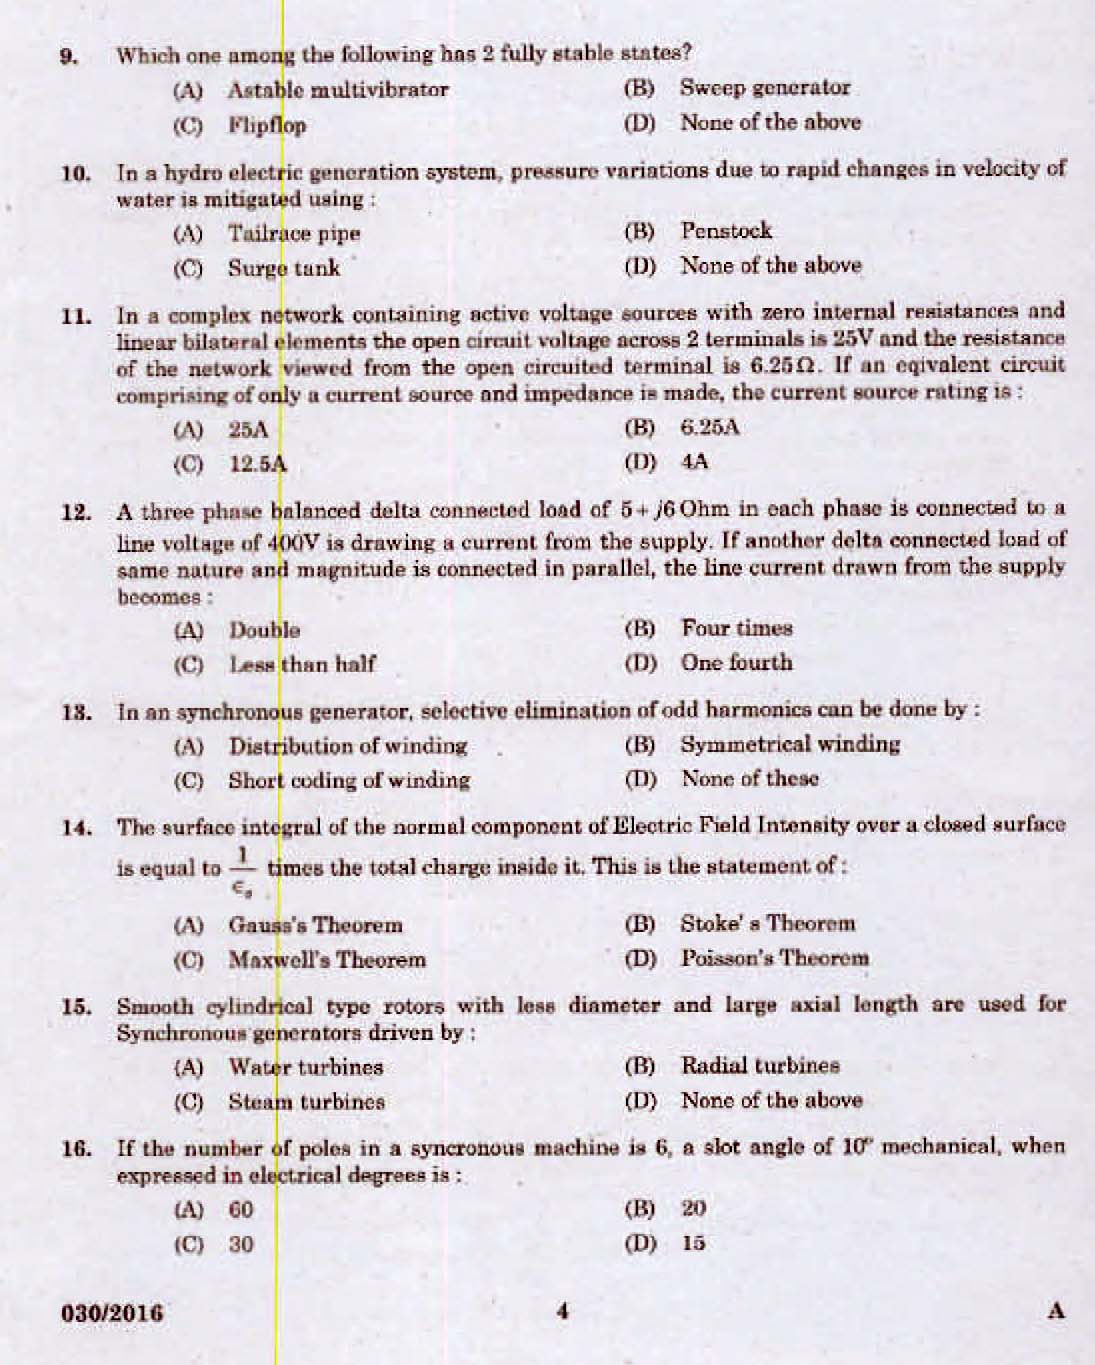 Kerala PSC Assistant Engineer Electrical Exam 2016 Question Paper Code 0302016 2